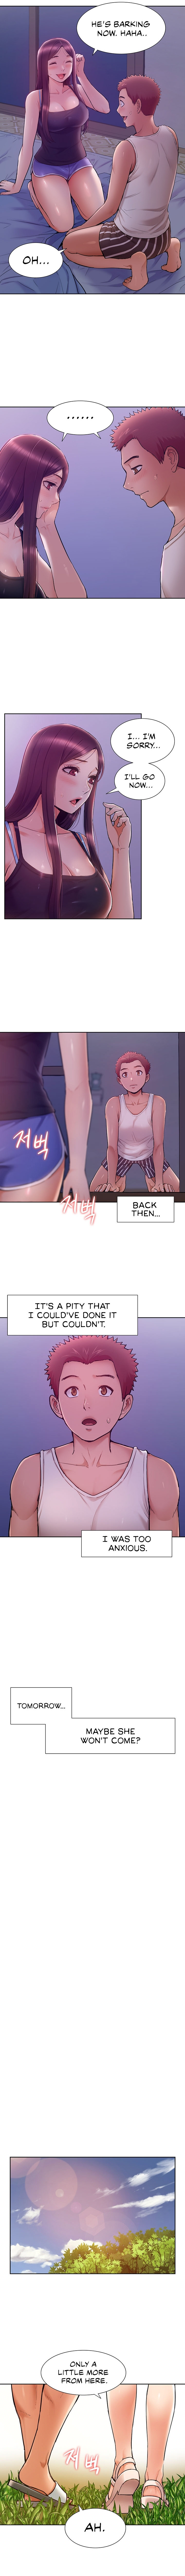 The Memories of that Summer Day - Chapter 22 Page 10